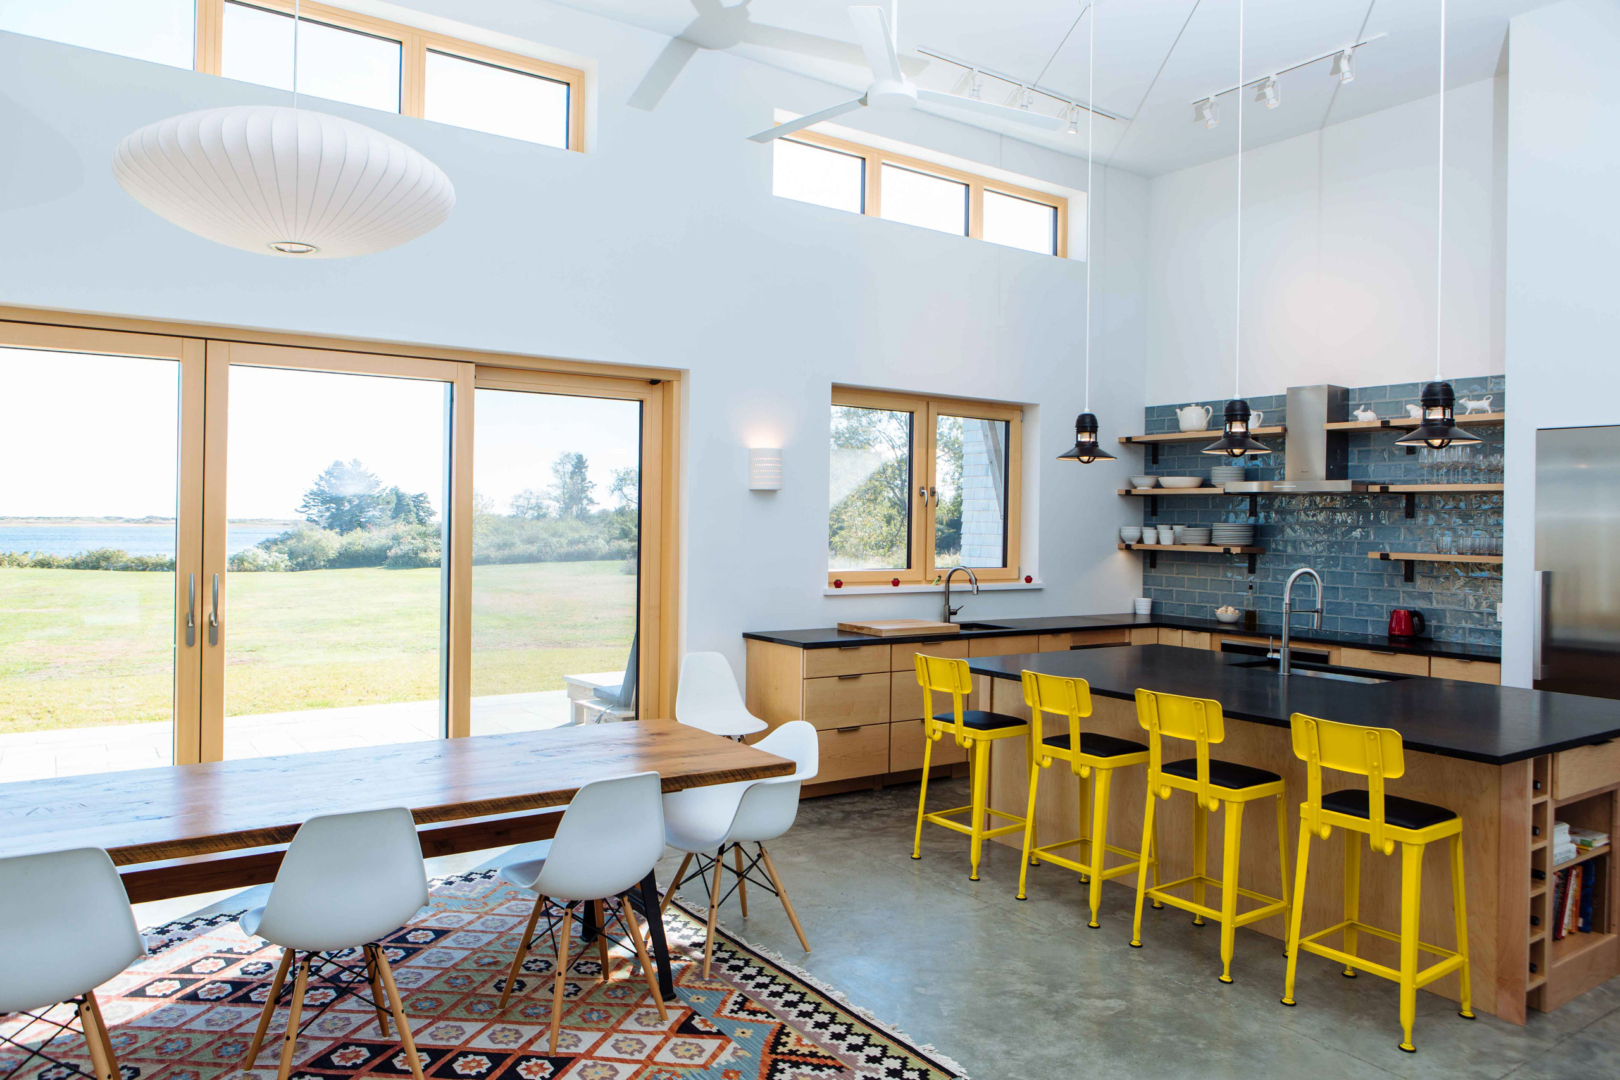 High ceilings with clerestory windows let in abundant light to the open kitchen and living spaces.